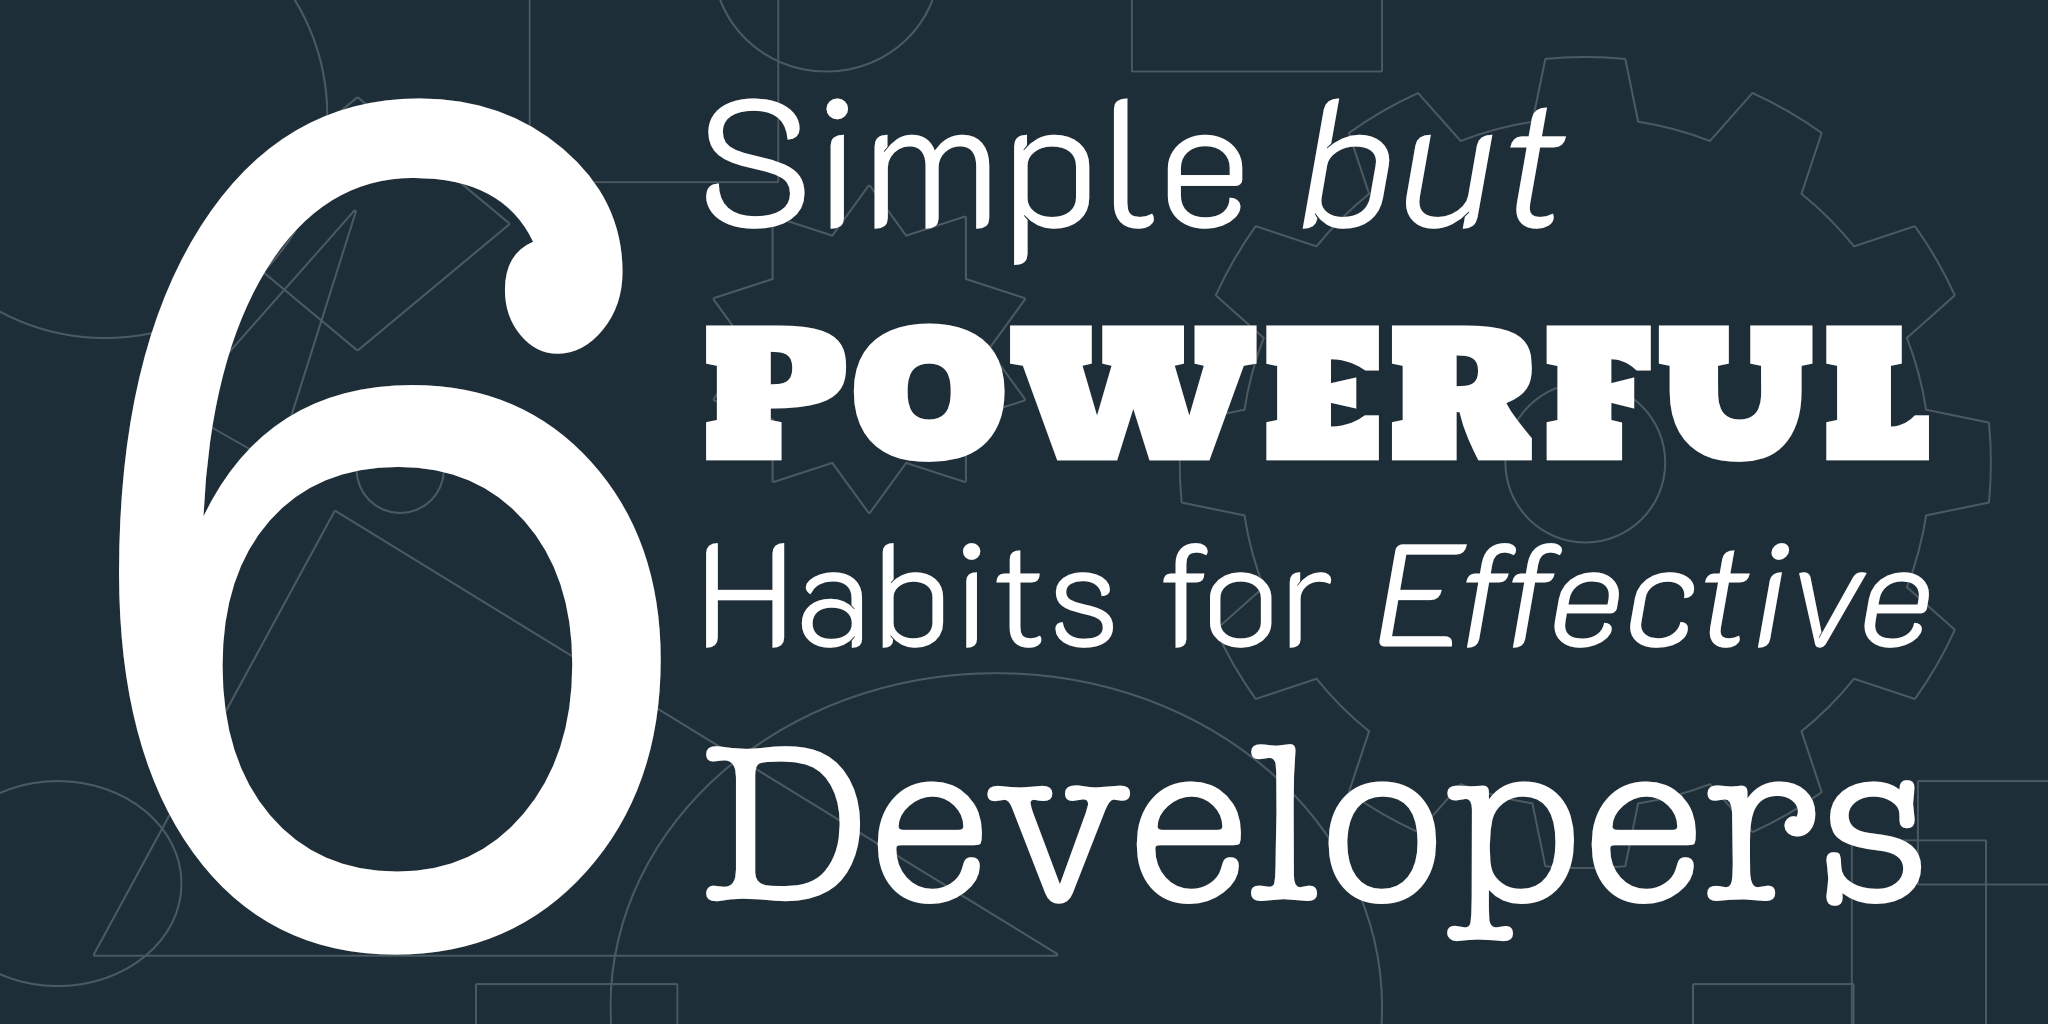 6 Simple but Powerful Habits for Effective Developers